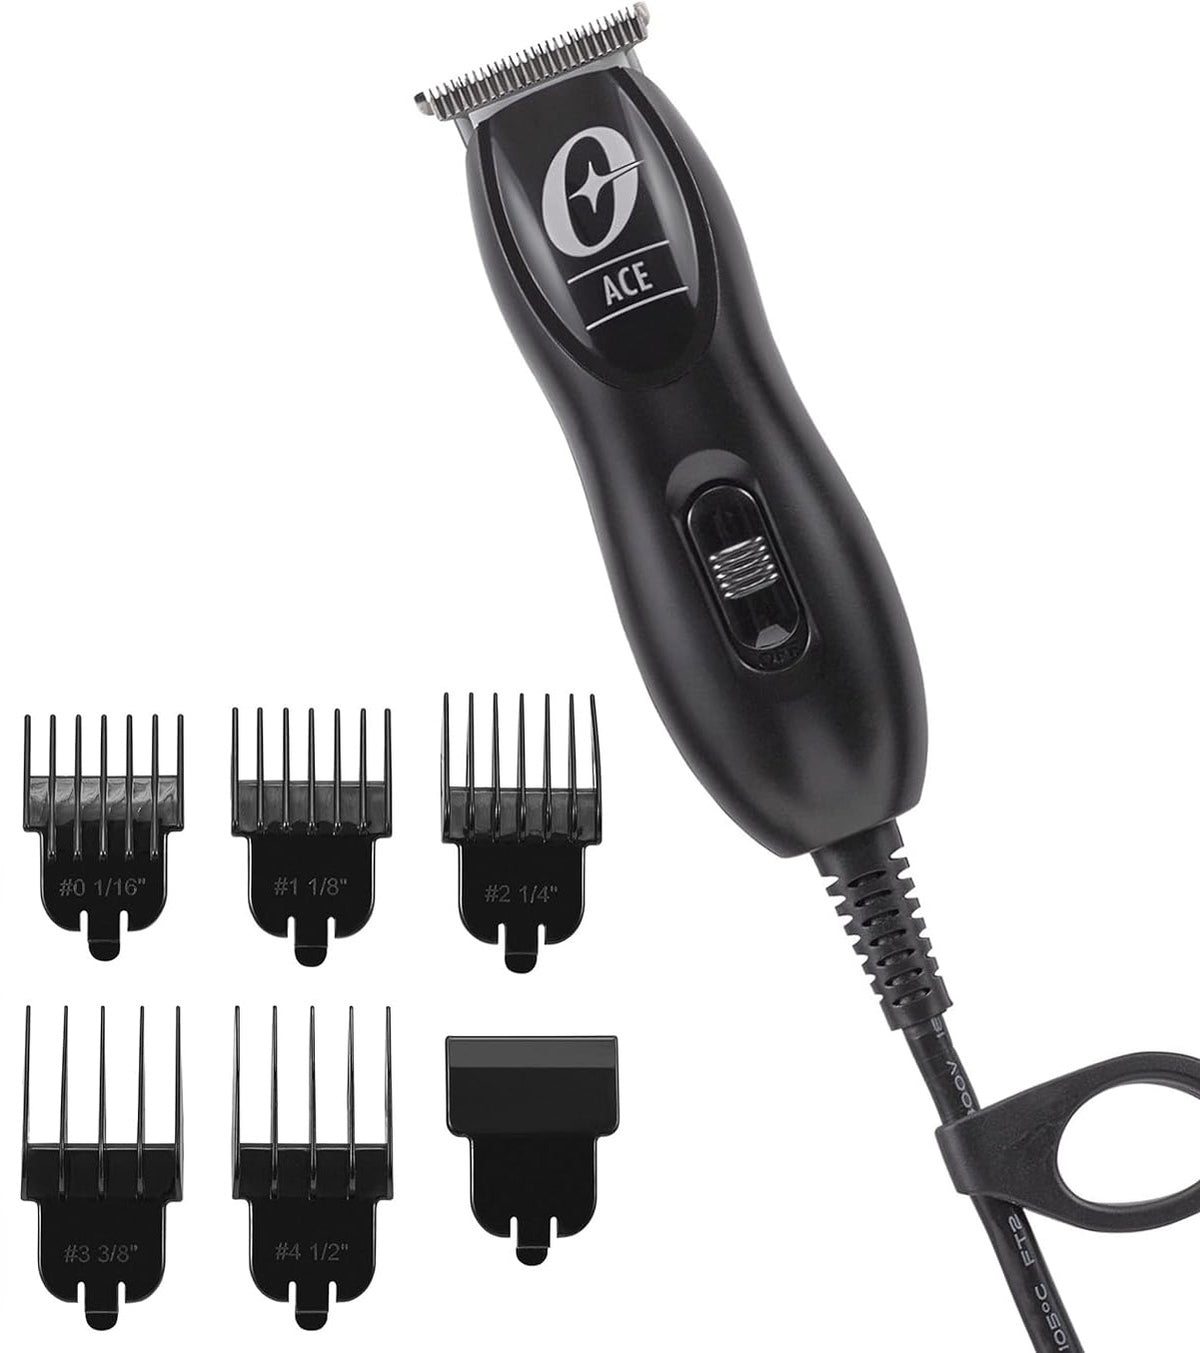 Oster Ace T Blade Corded Trimmer Finisher with Combs 0,1,2,3,4